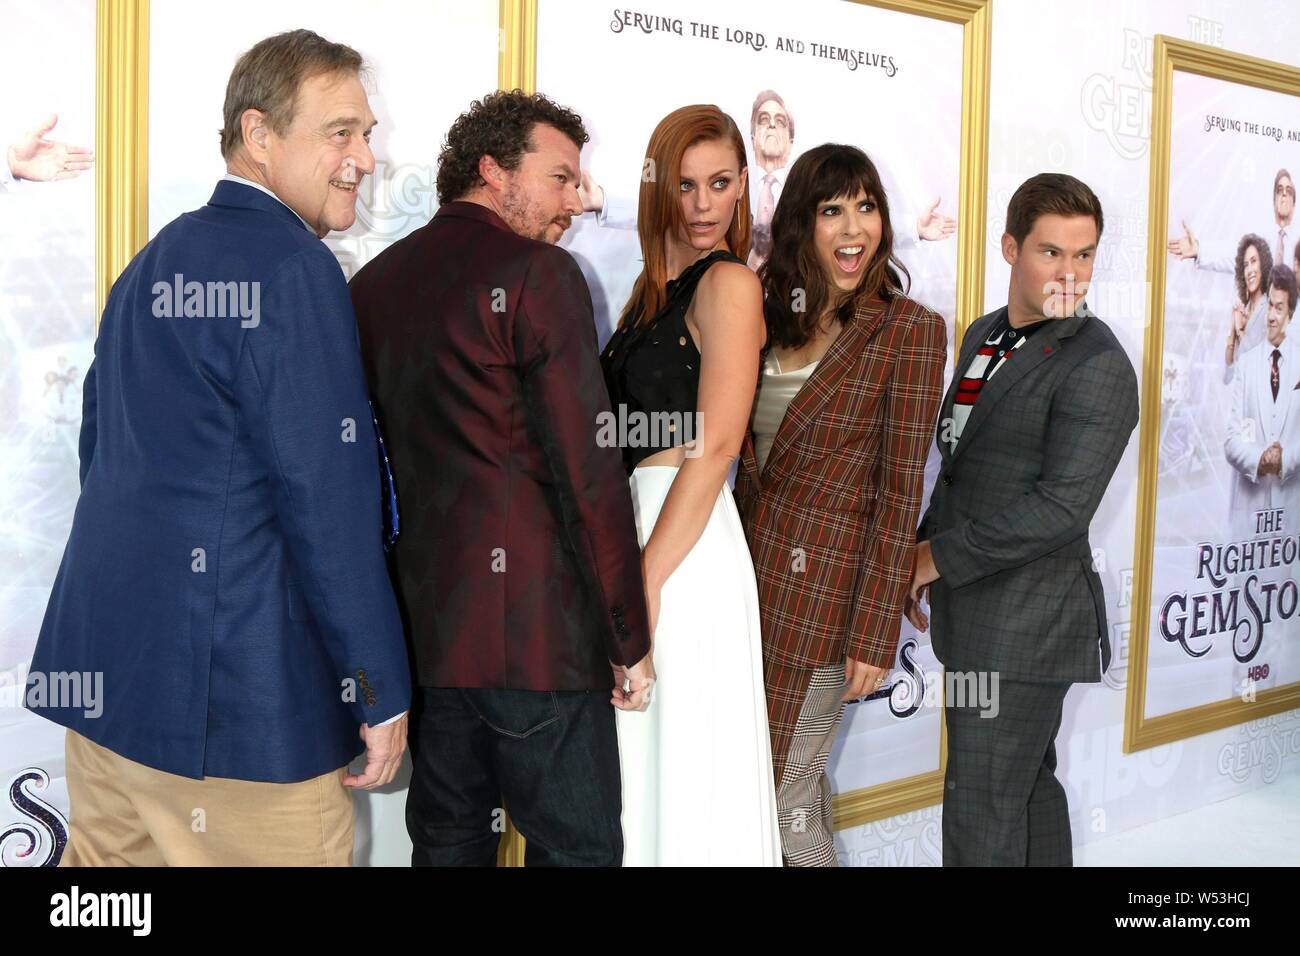 Los Angeles, CA, USA. 25th July, 2019. John Goodman, Danny McBride, Cassidy Freeman, Edi Patterson, Adam DeVine at arrivals for HBO Series THE RIGHTEOUS GEMSTONES Premiere, Paramount, Los Angeles, CA July 25, 2019. Credit: Priscilla Grant/Everett Collection/Alamy Live News Stock Photo